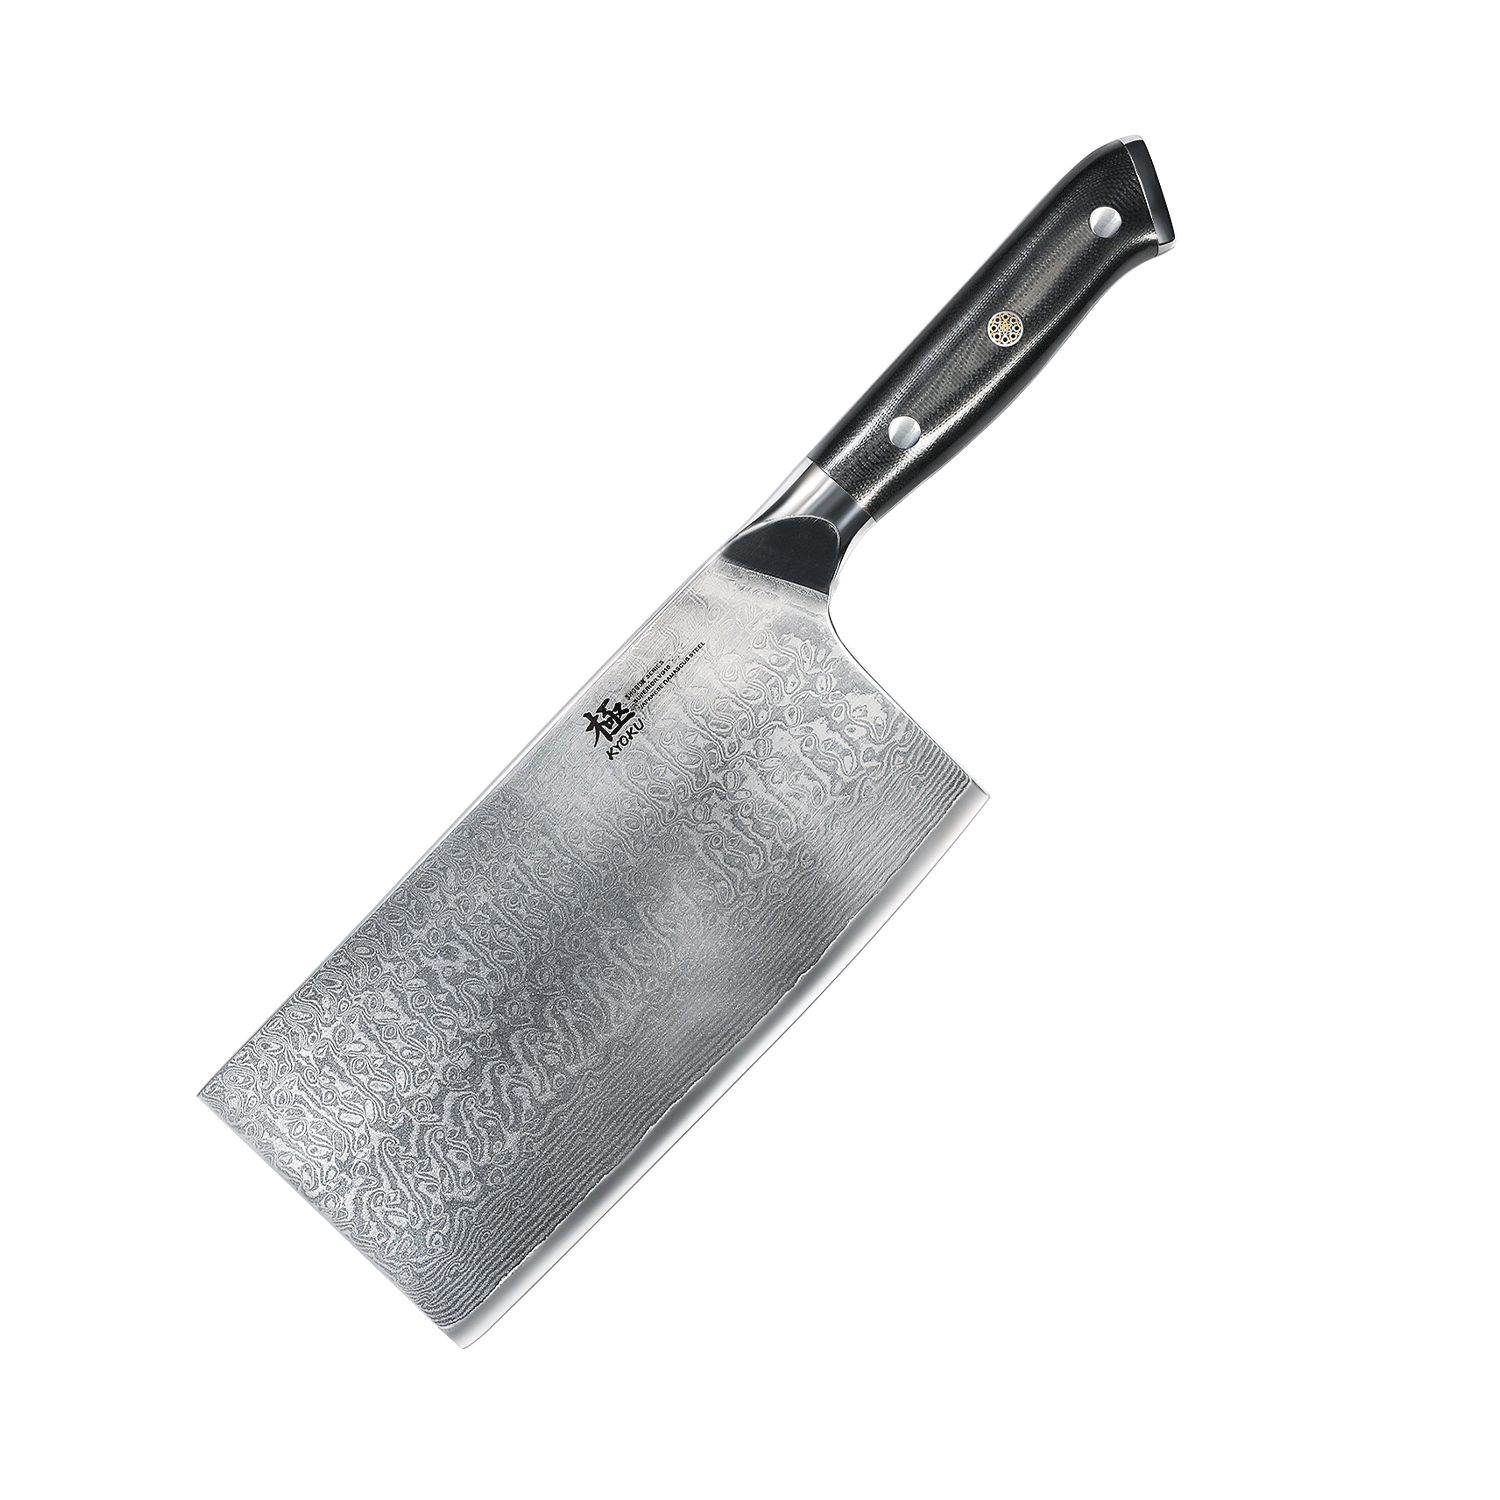 Chef Cleaver Boning Knife Set Kitchen Chopper Stainless Steel Forged Meat  Knife